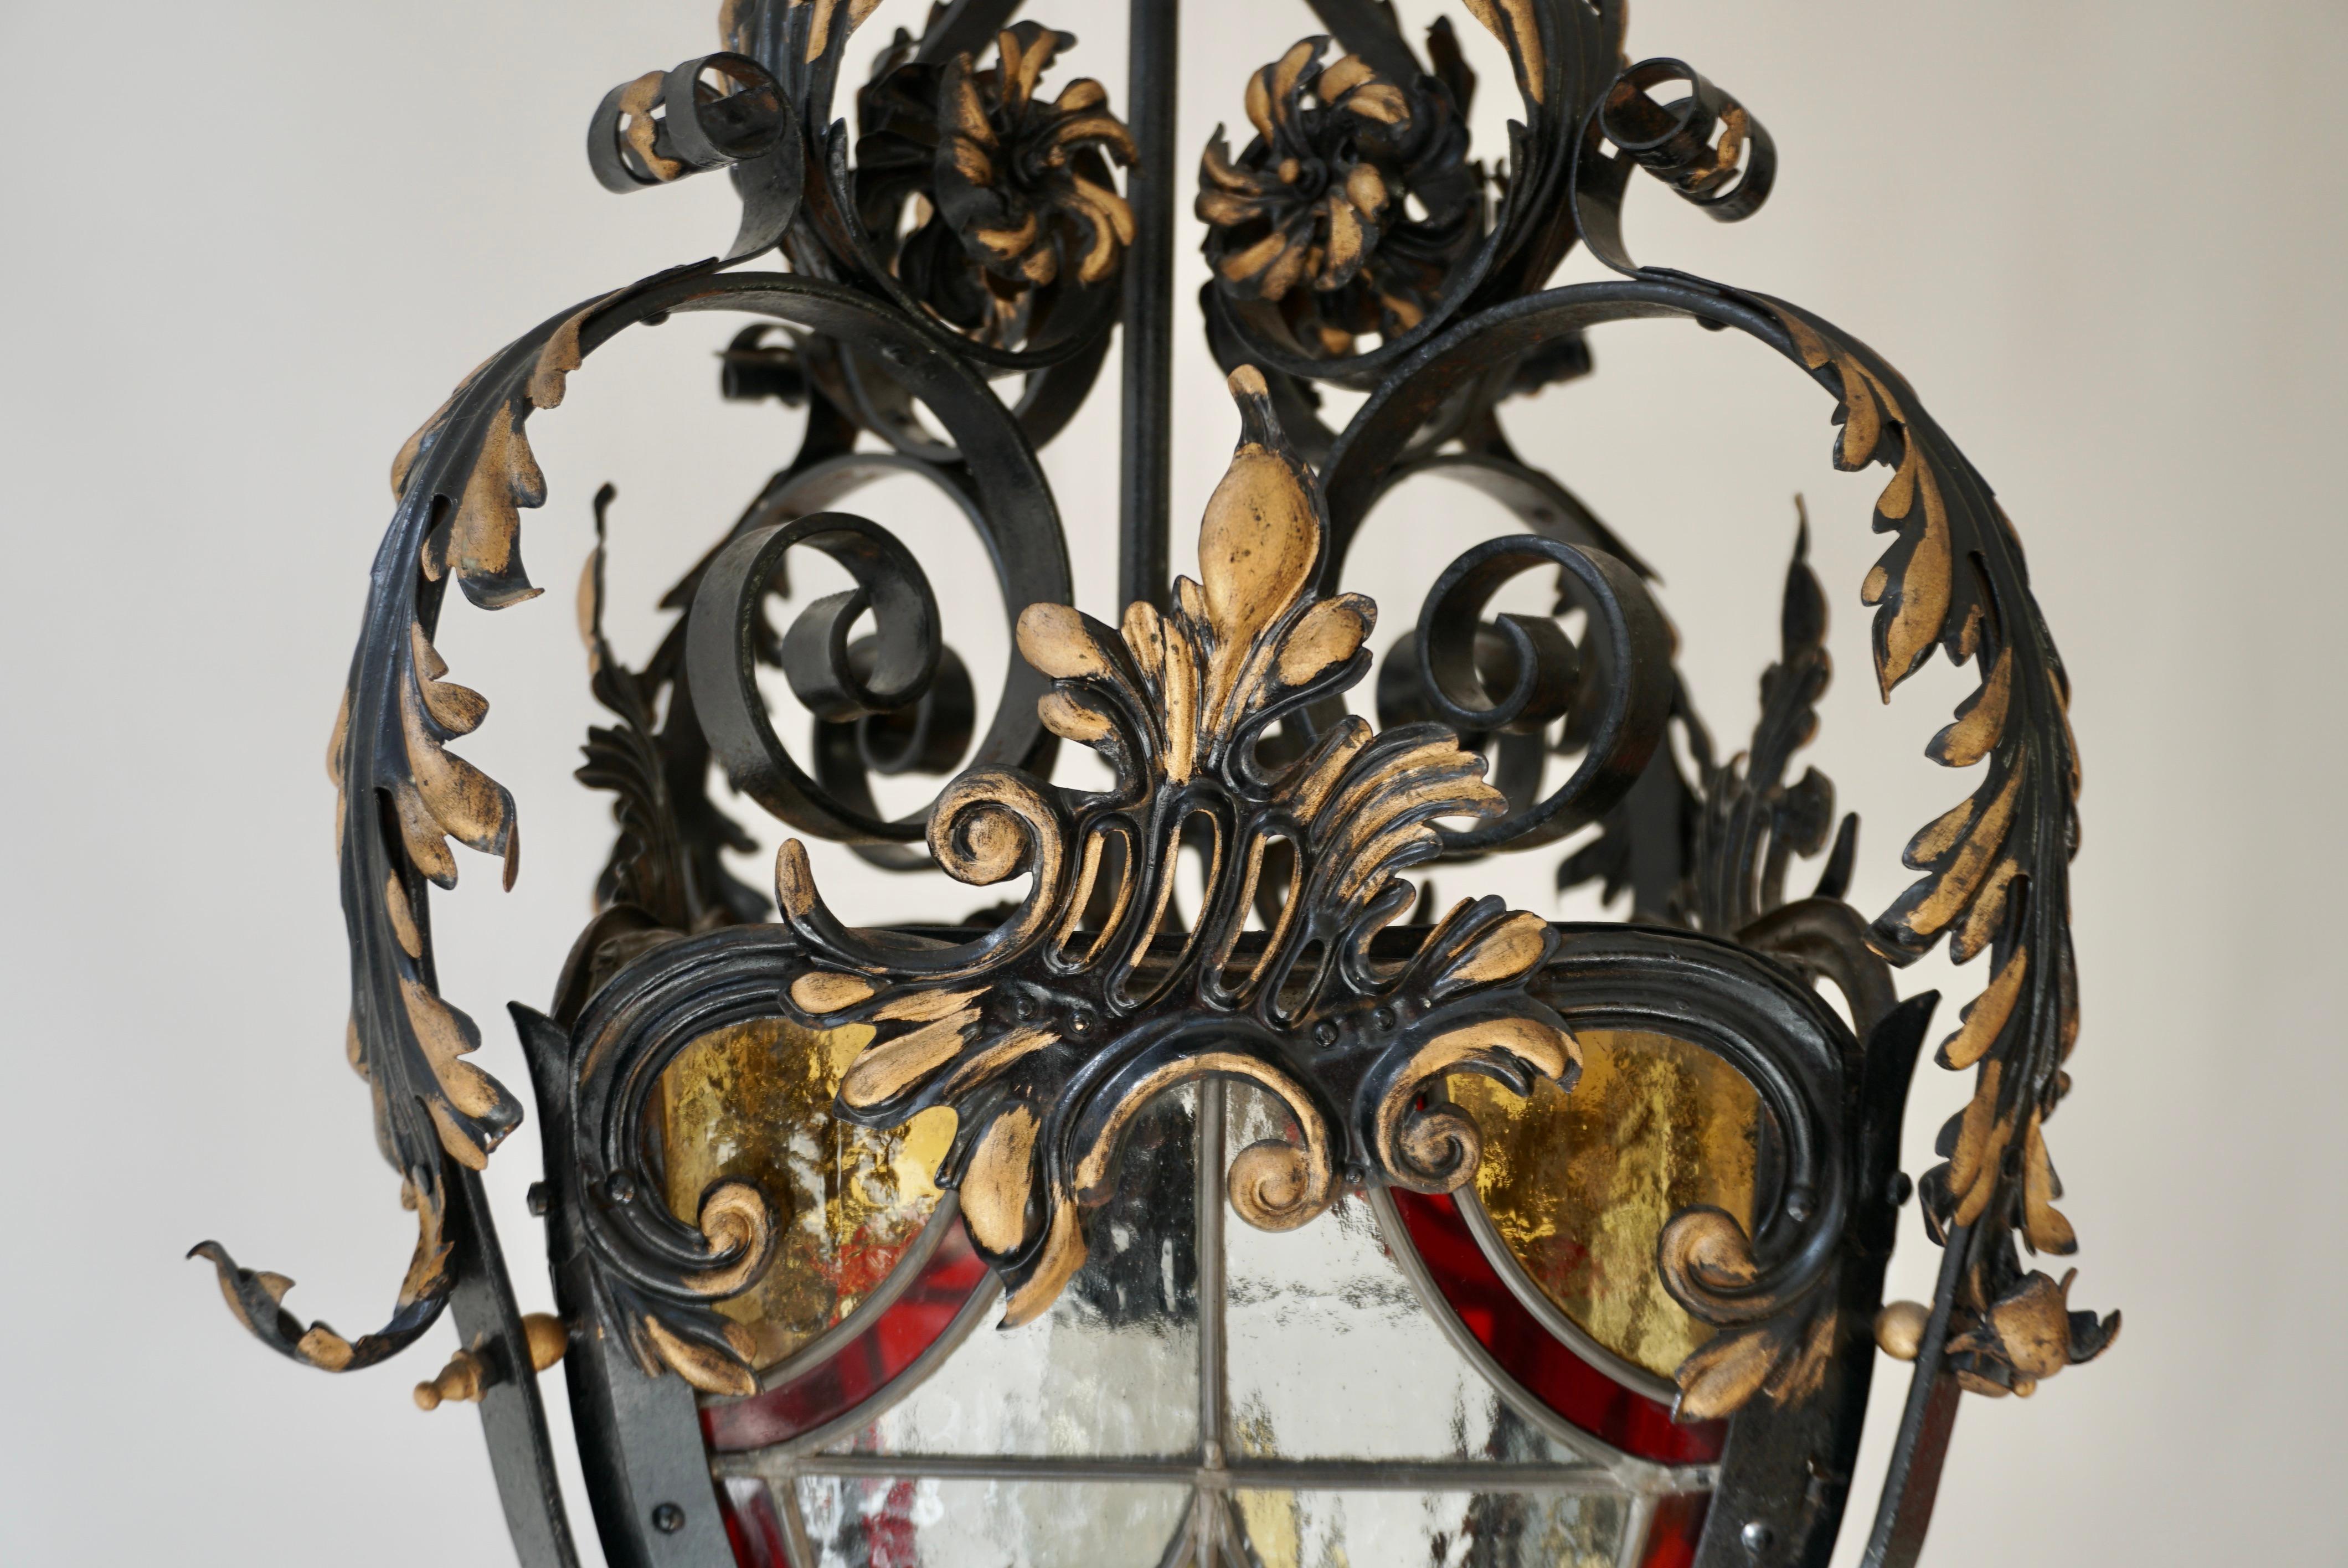  Italian Scrolled Wrought Iron and Stained Glass Hanging Hall Lantern, C. 1900 For Sale 8